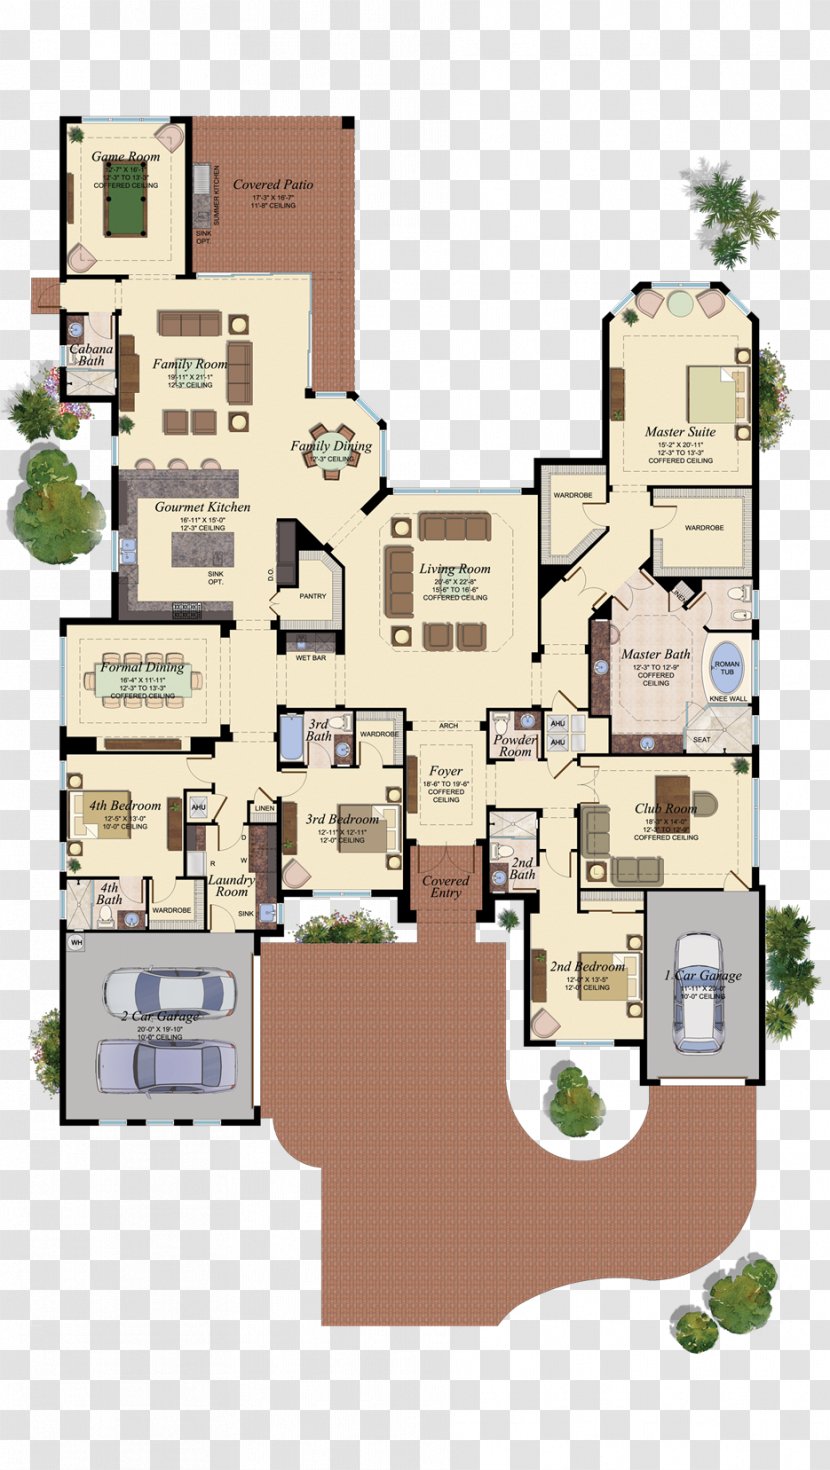 The Sims 4 3 House Plan Floor - Courtyard Transparent PNG